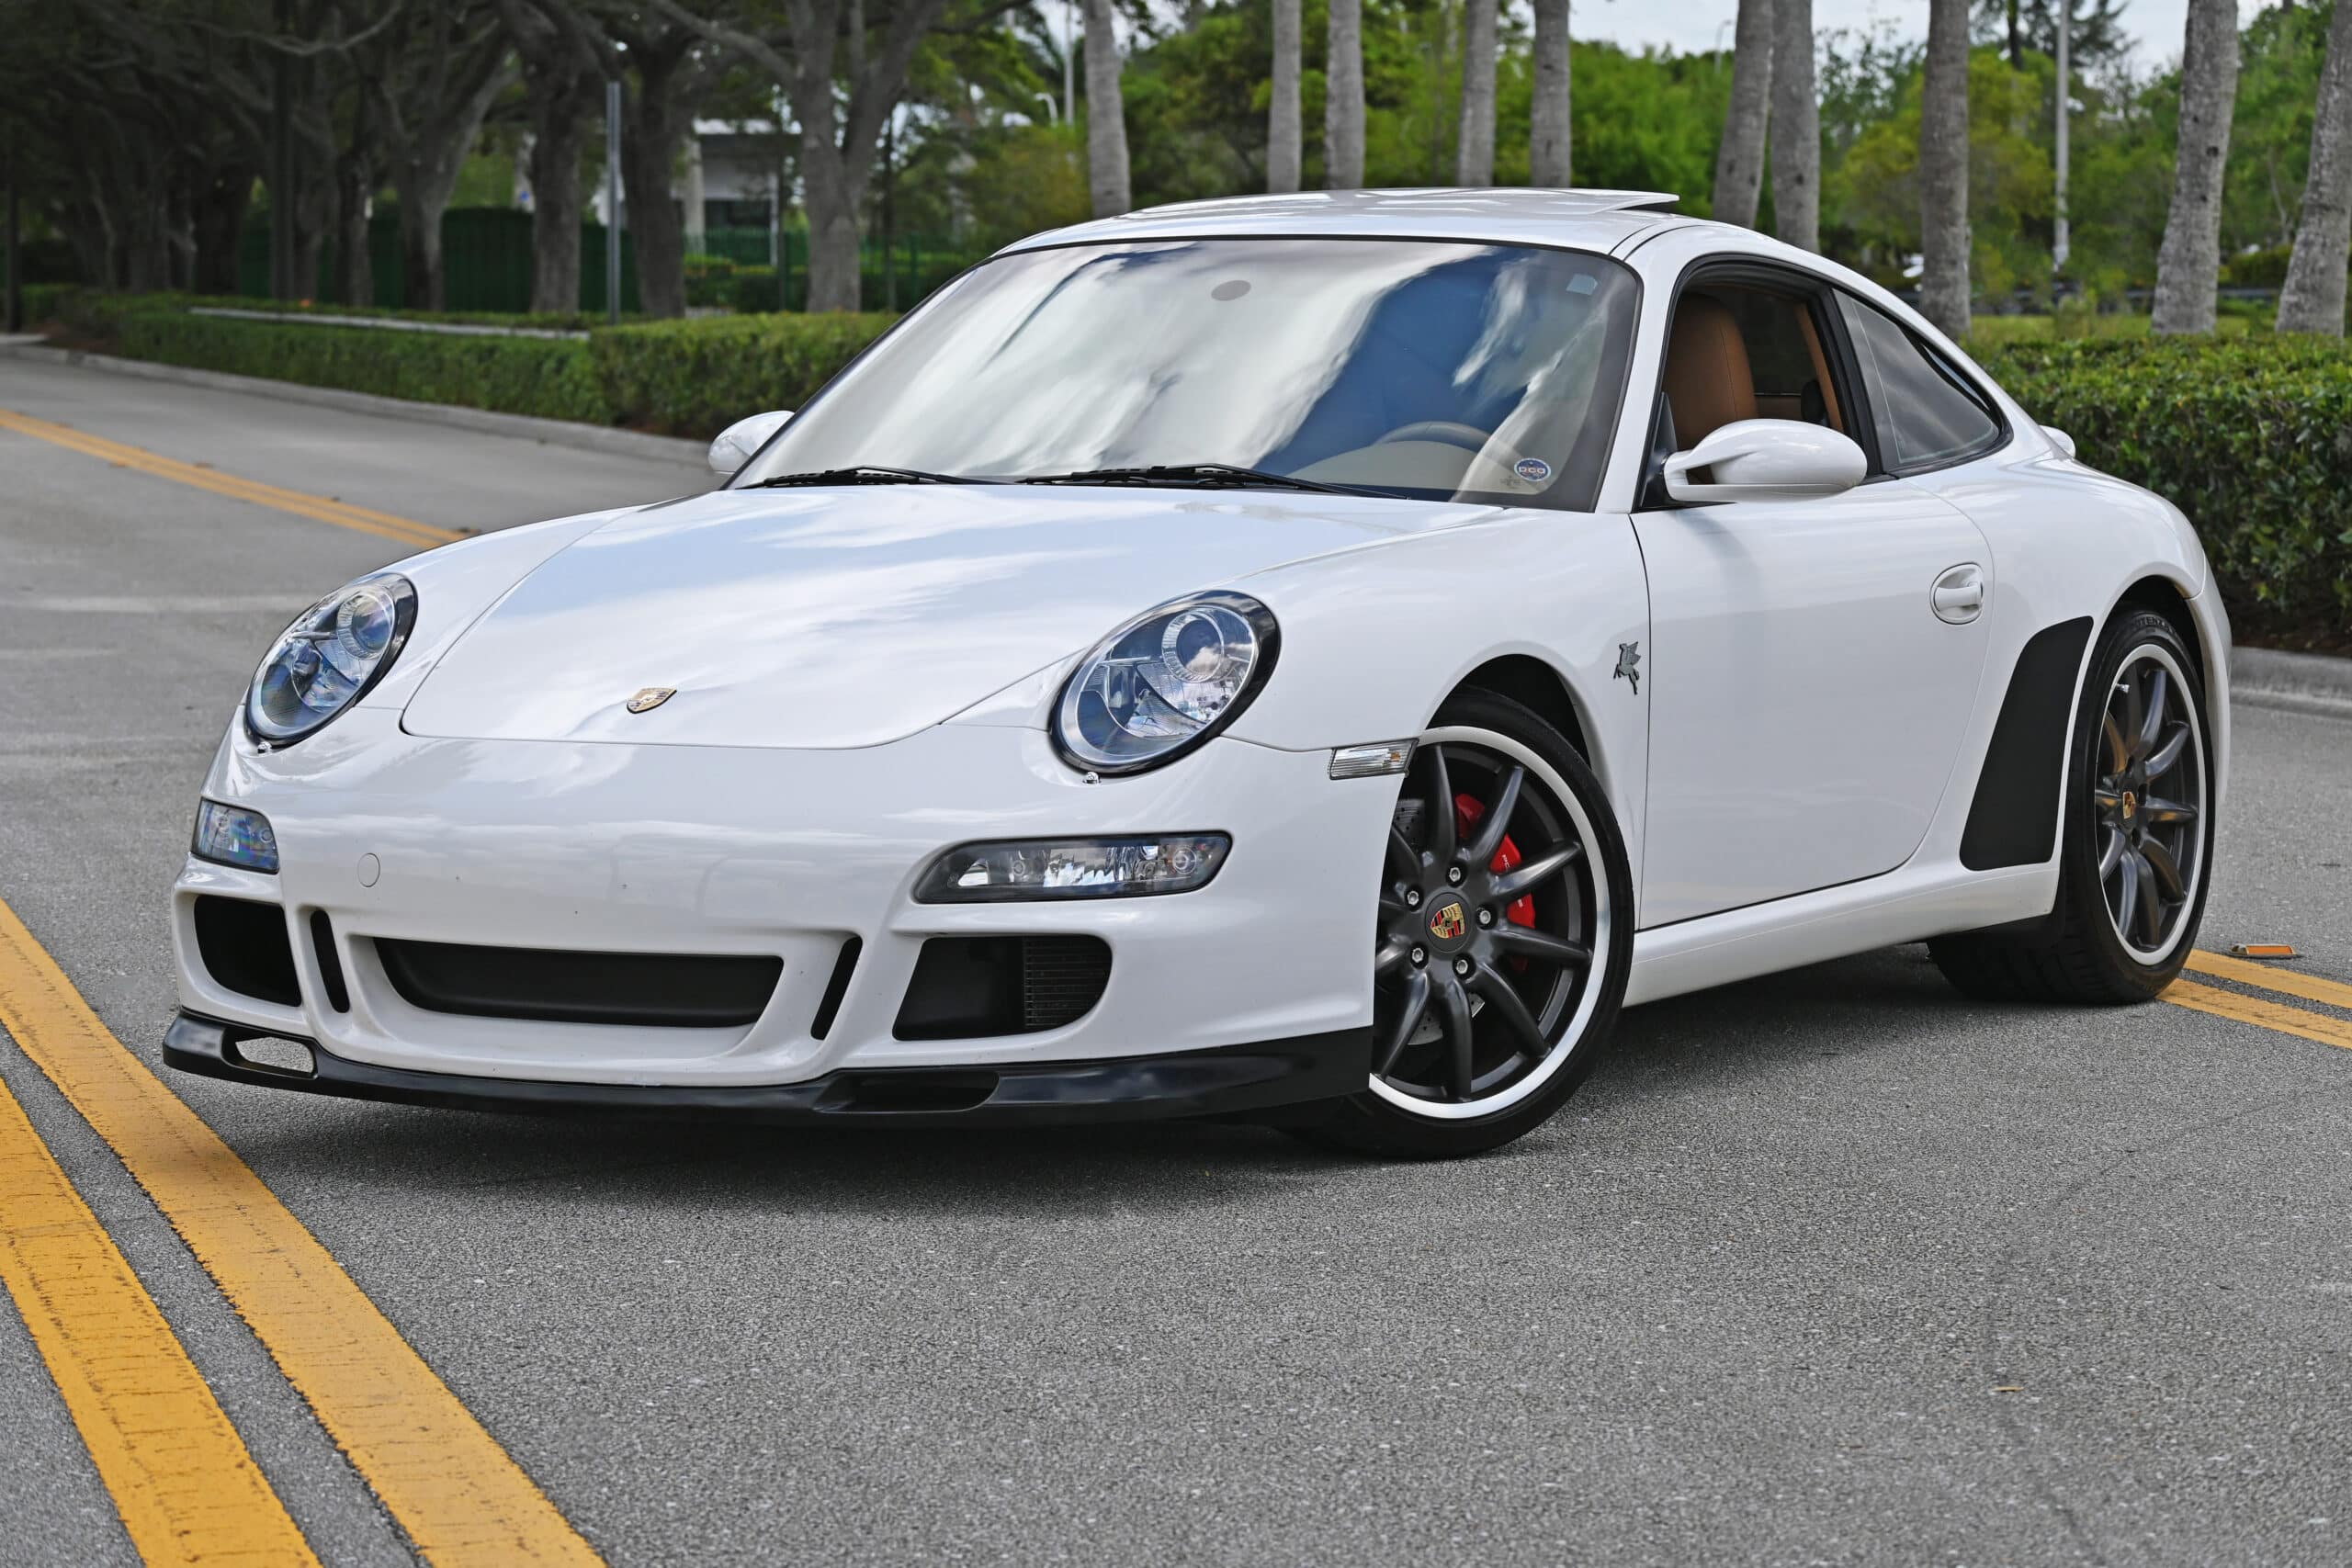 2008 997 Carrera S / 49K miles / GT3 Front Bumper / Fabspeed Exhaust and Intake / Service History